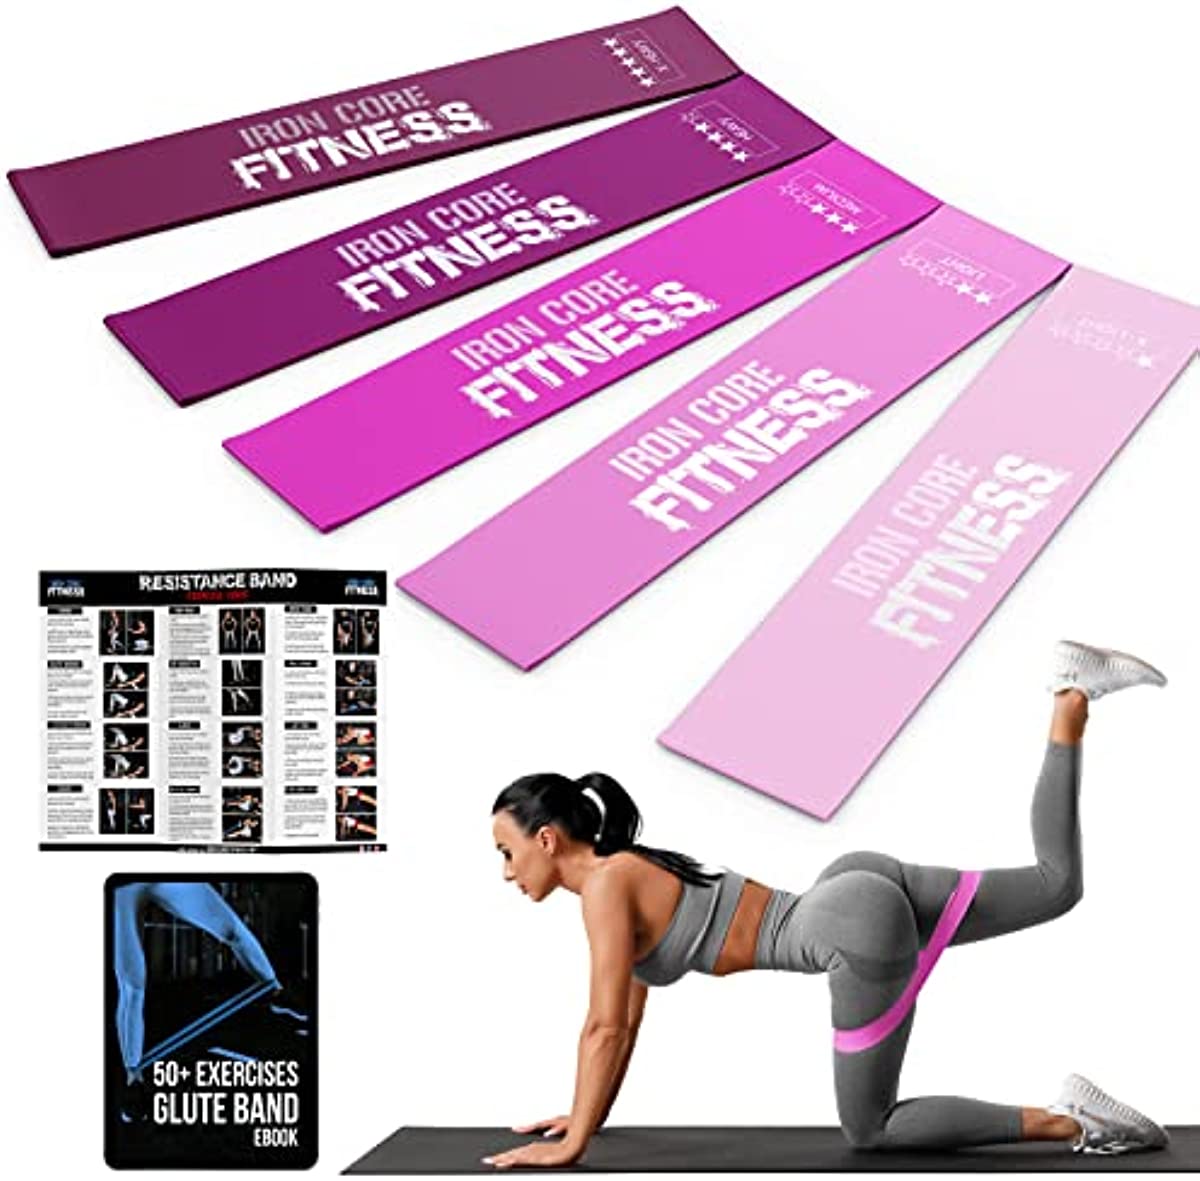 Mini Loop Resistance Bands Set of 5 Workout Bands for Men and Women in Unique Colours- Ebook and Chart Included by Iron Core Fitness (Pink Blush Pallette)